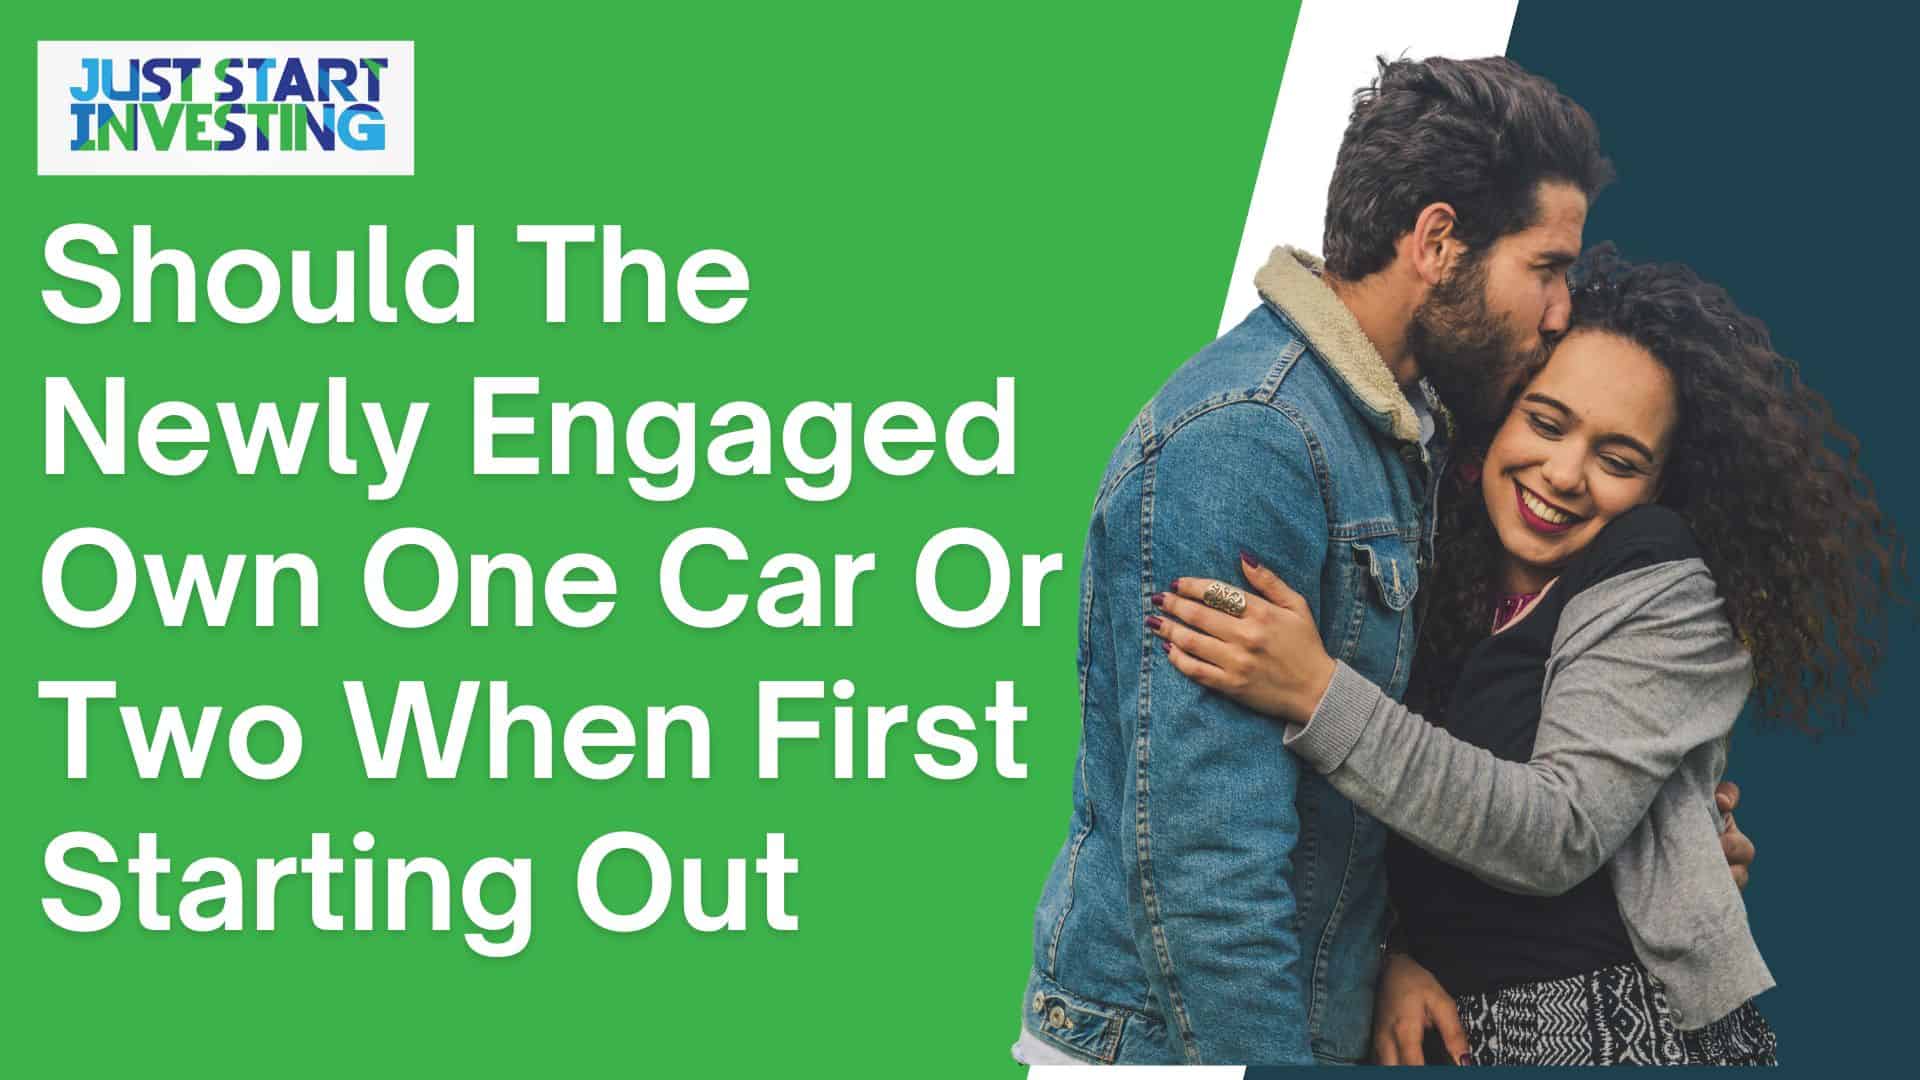 Should The Newly Engaged Own One Car Or Two When First Starting Out